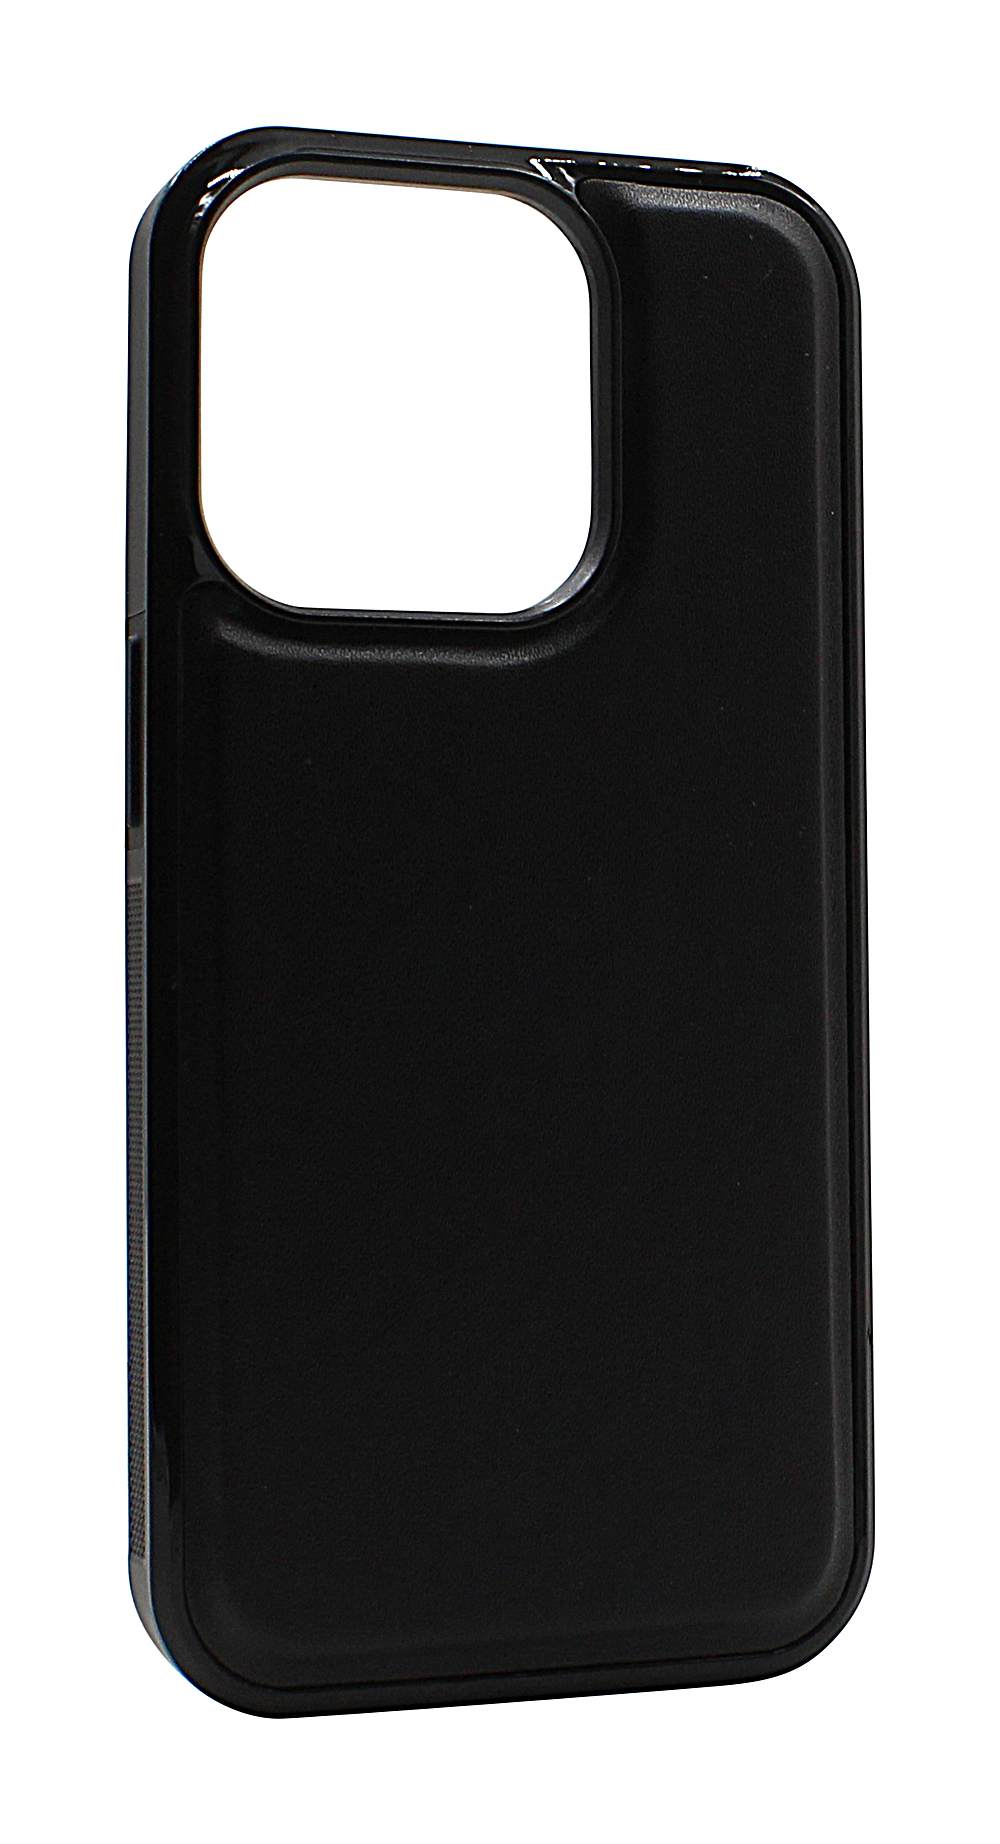 Magnet Cover iPhone 15 Pro